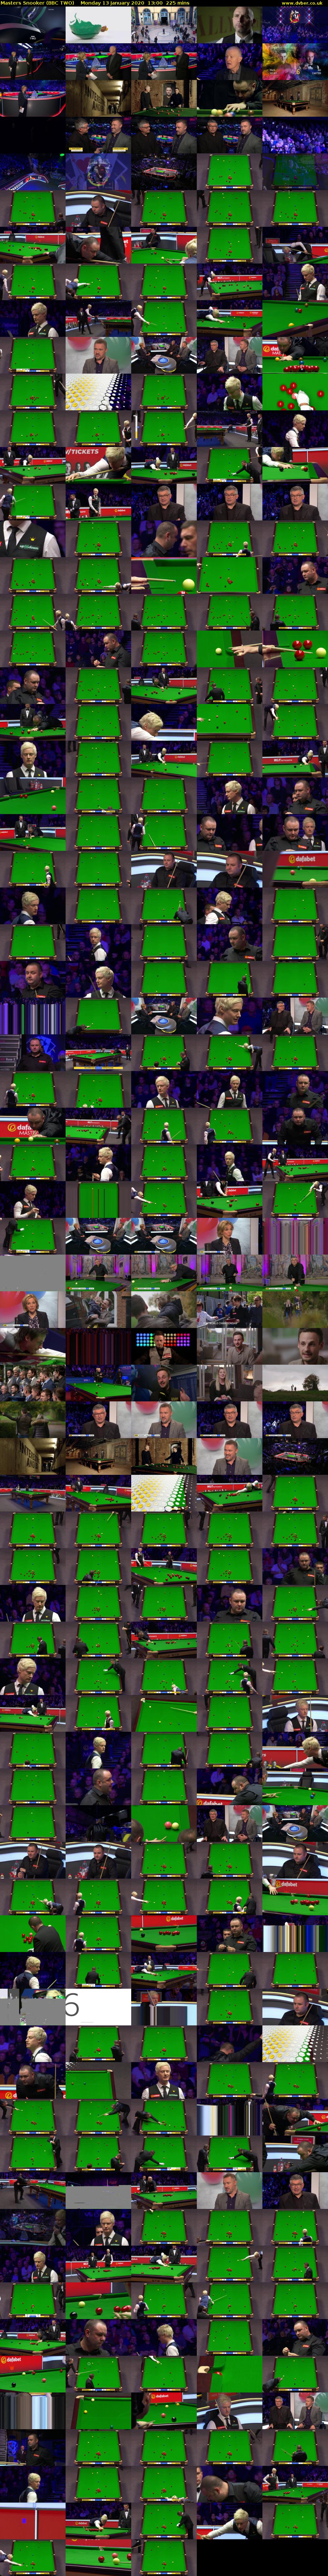 Masters Snooker (BBC TWO) Monday 13 January 2020 13:00 - 16:45